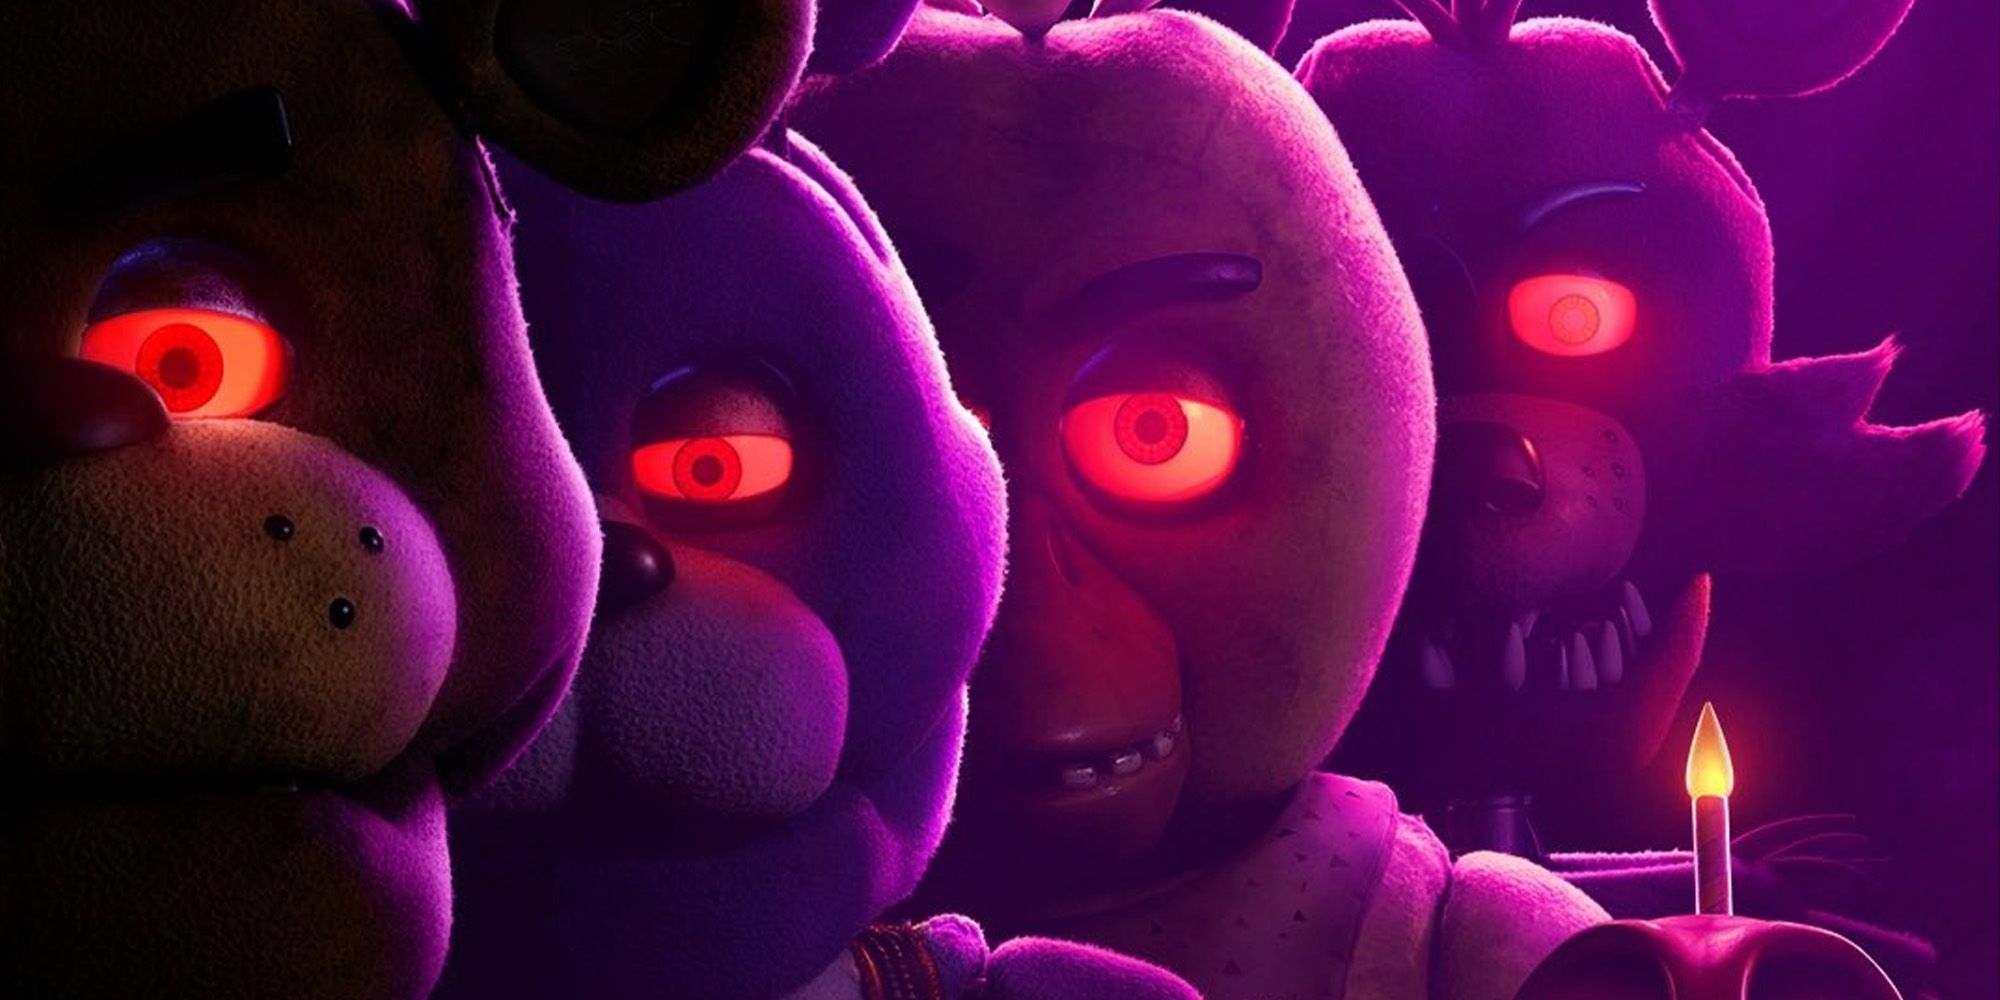 The Five Nights at Freddy‘s movie poster.